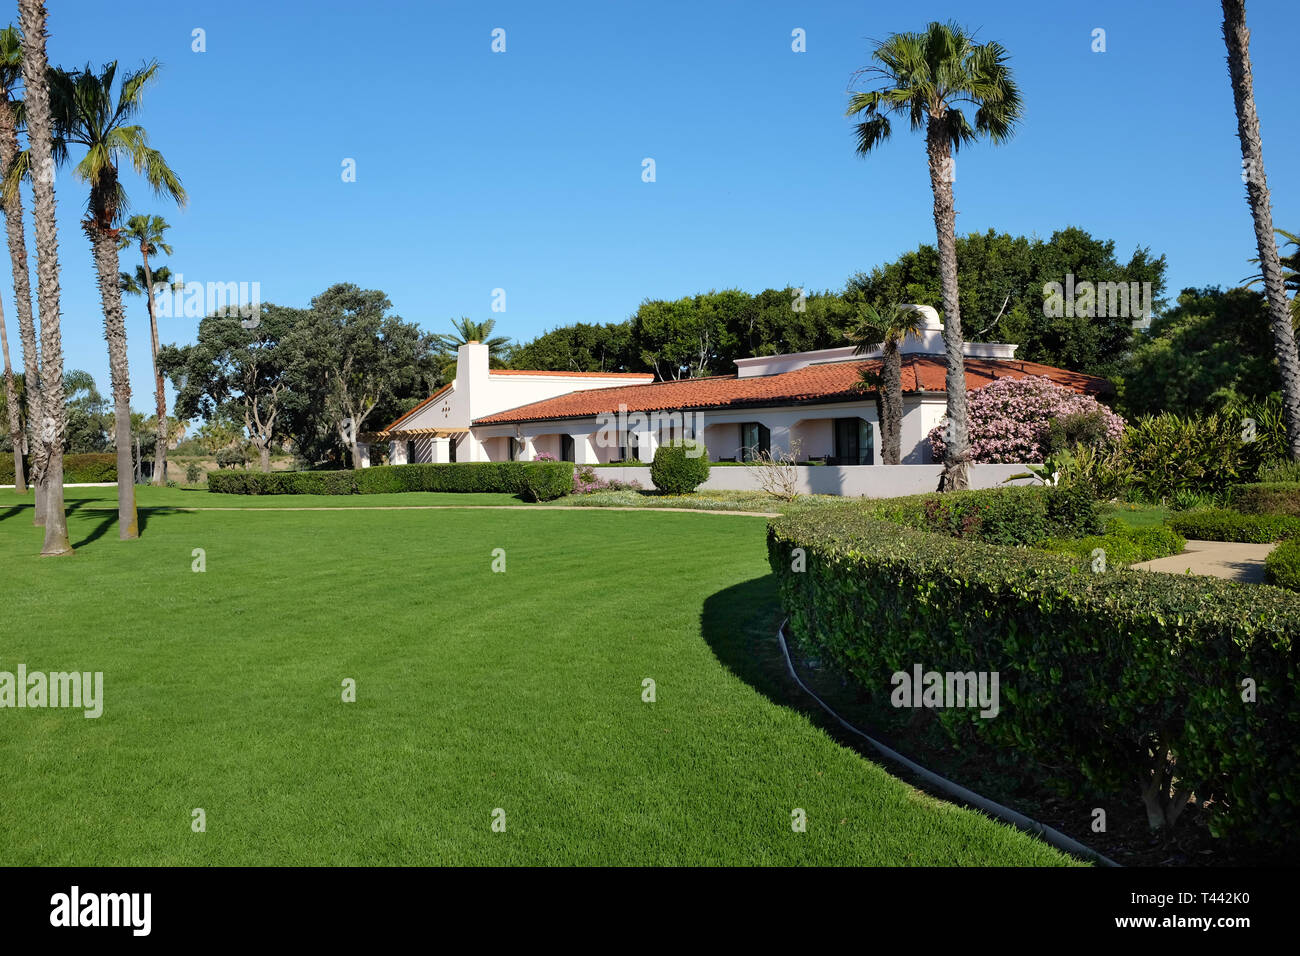 SANTA BARBARA, CALIFORNIA - APRIL 12, 2019: Grounds and buildings at the Hilton Santa Barbara Beachfront Resort, located minutes from downtown with st Stock Photo